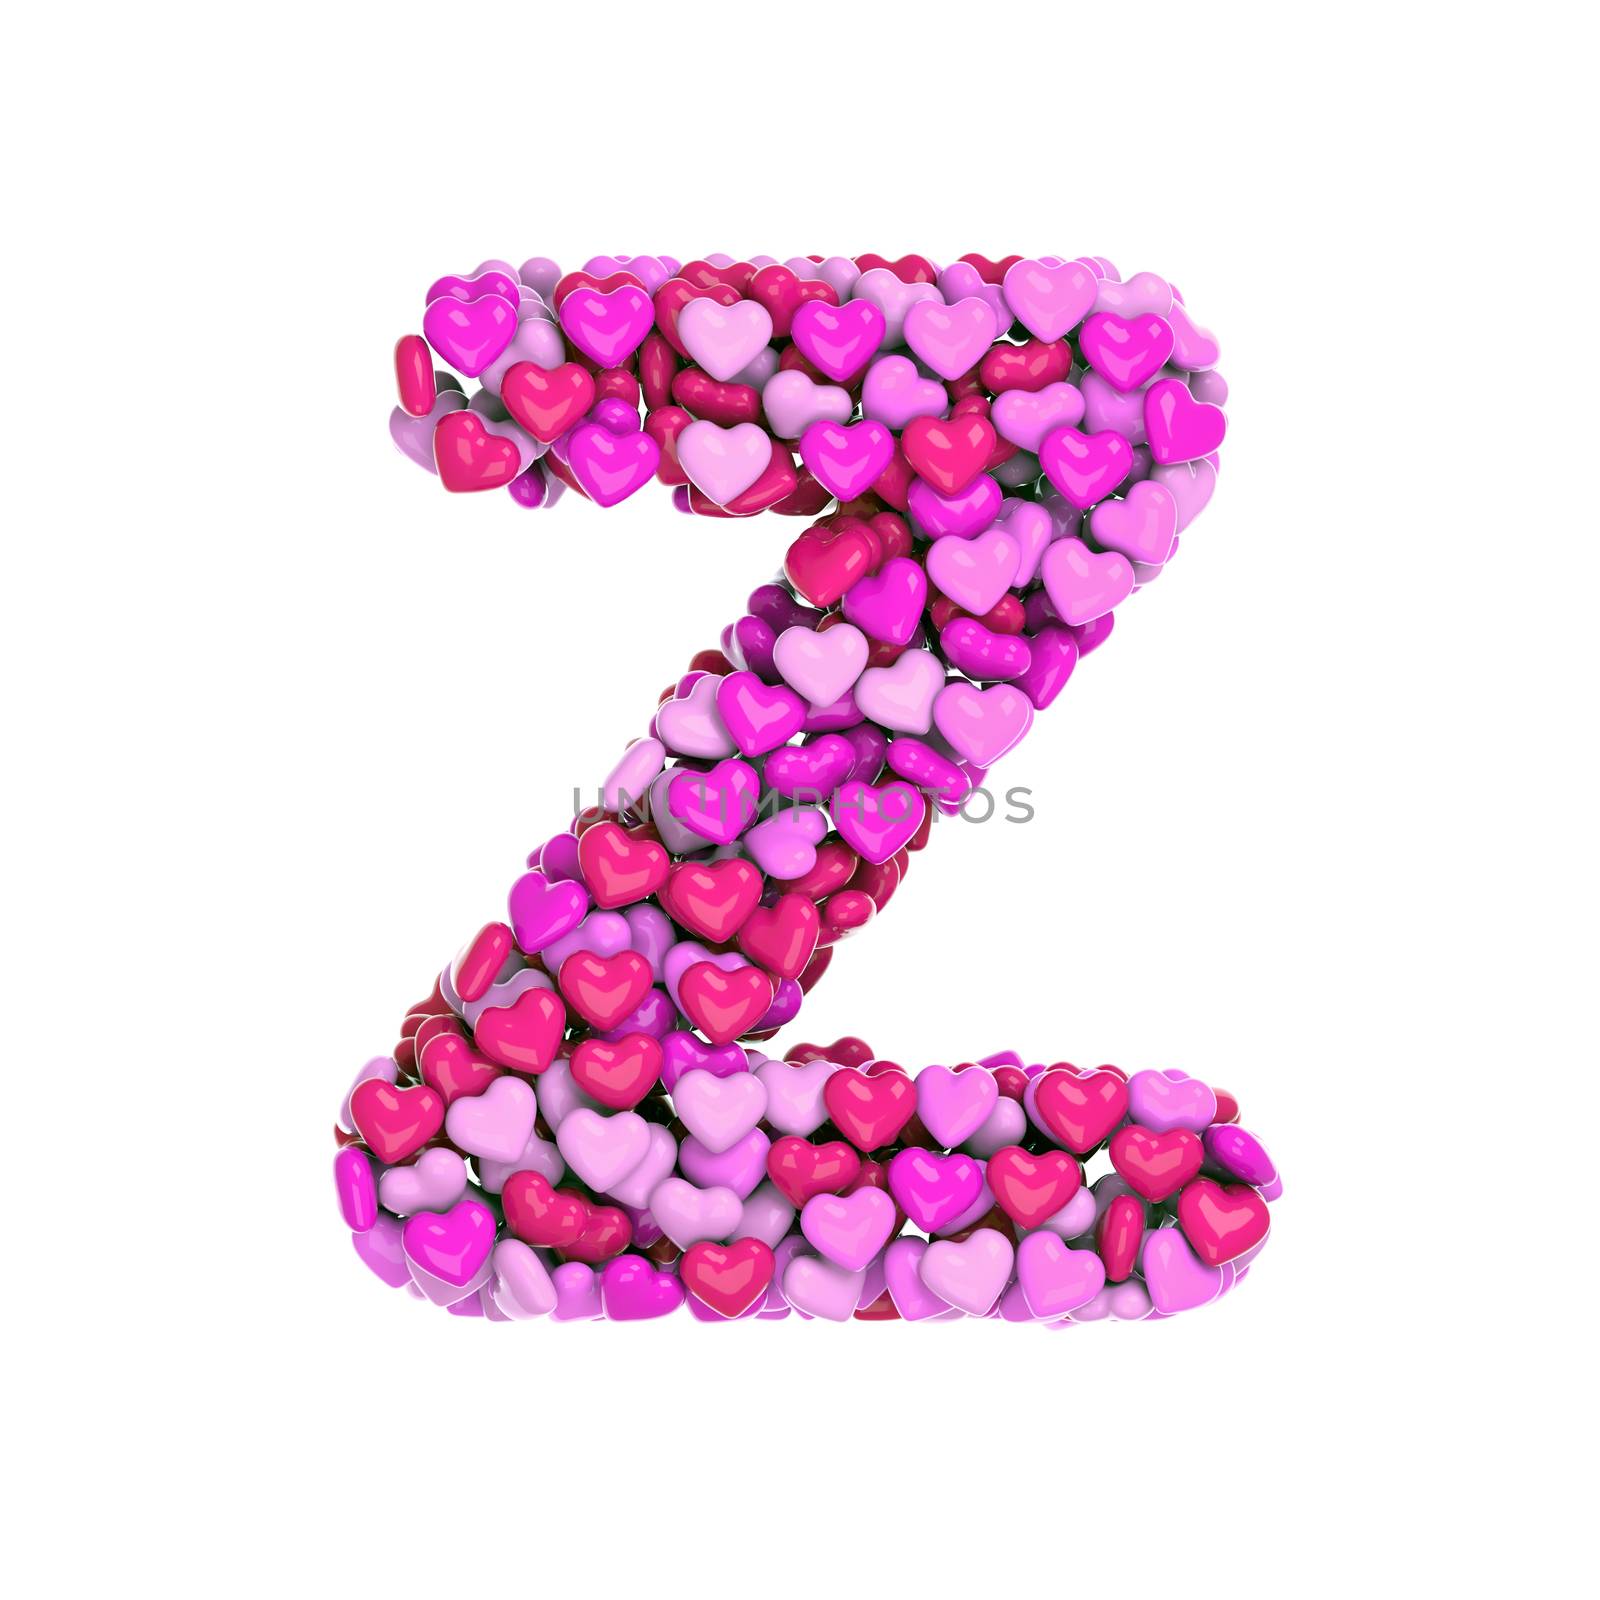 Valentine letter Z - Upper-case 3d pink hearts font - Love, passion or wedding concept by chrisroll